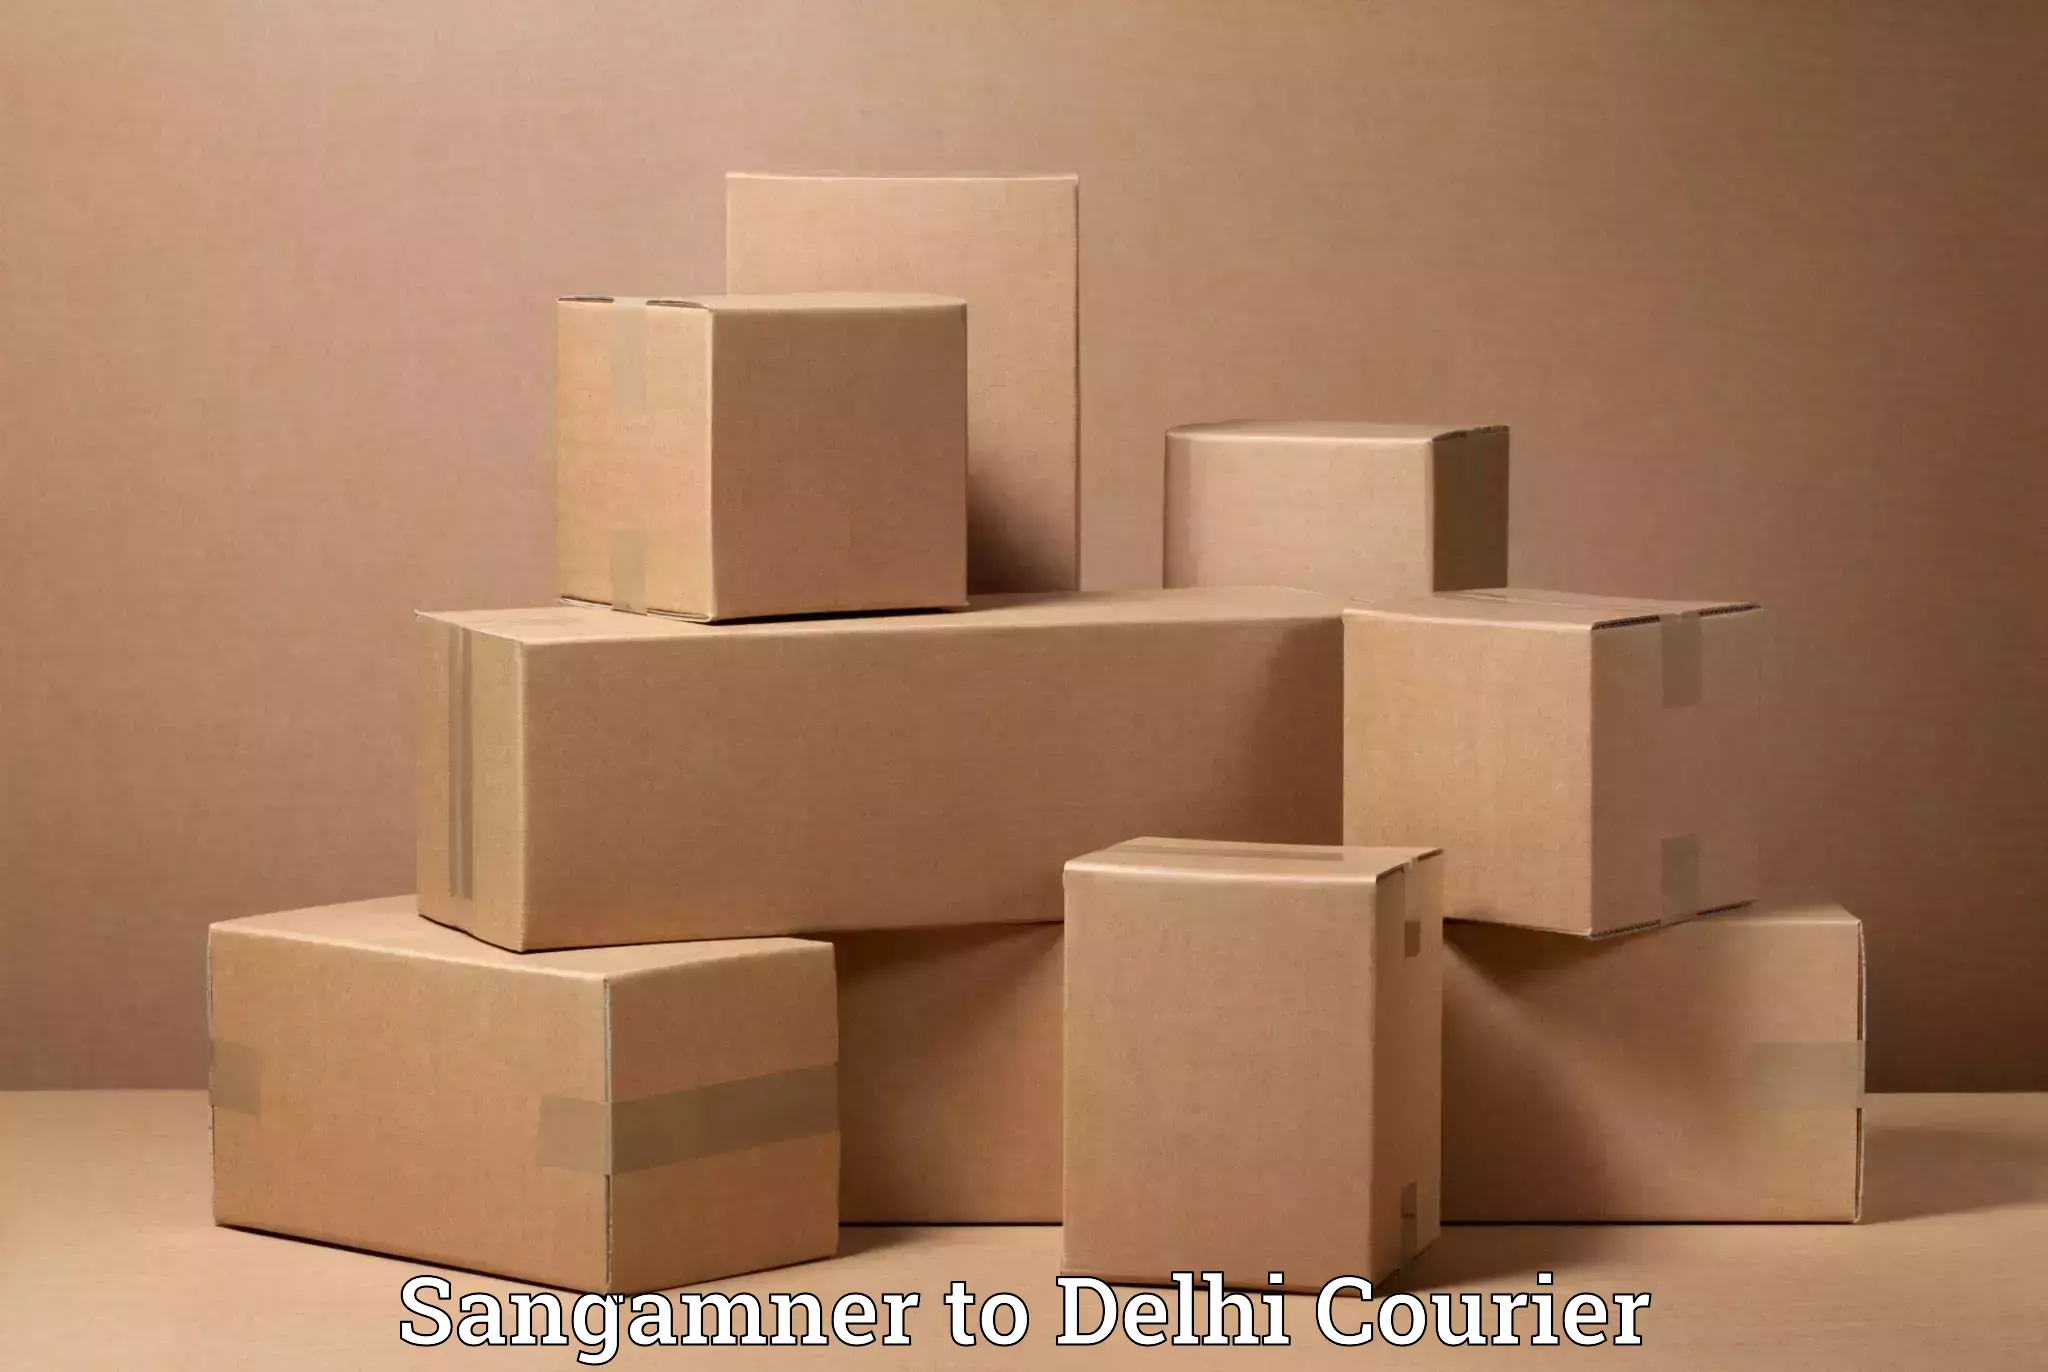 Trusted moving company Sangamner to Lodhi Road